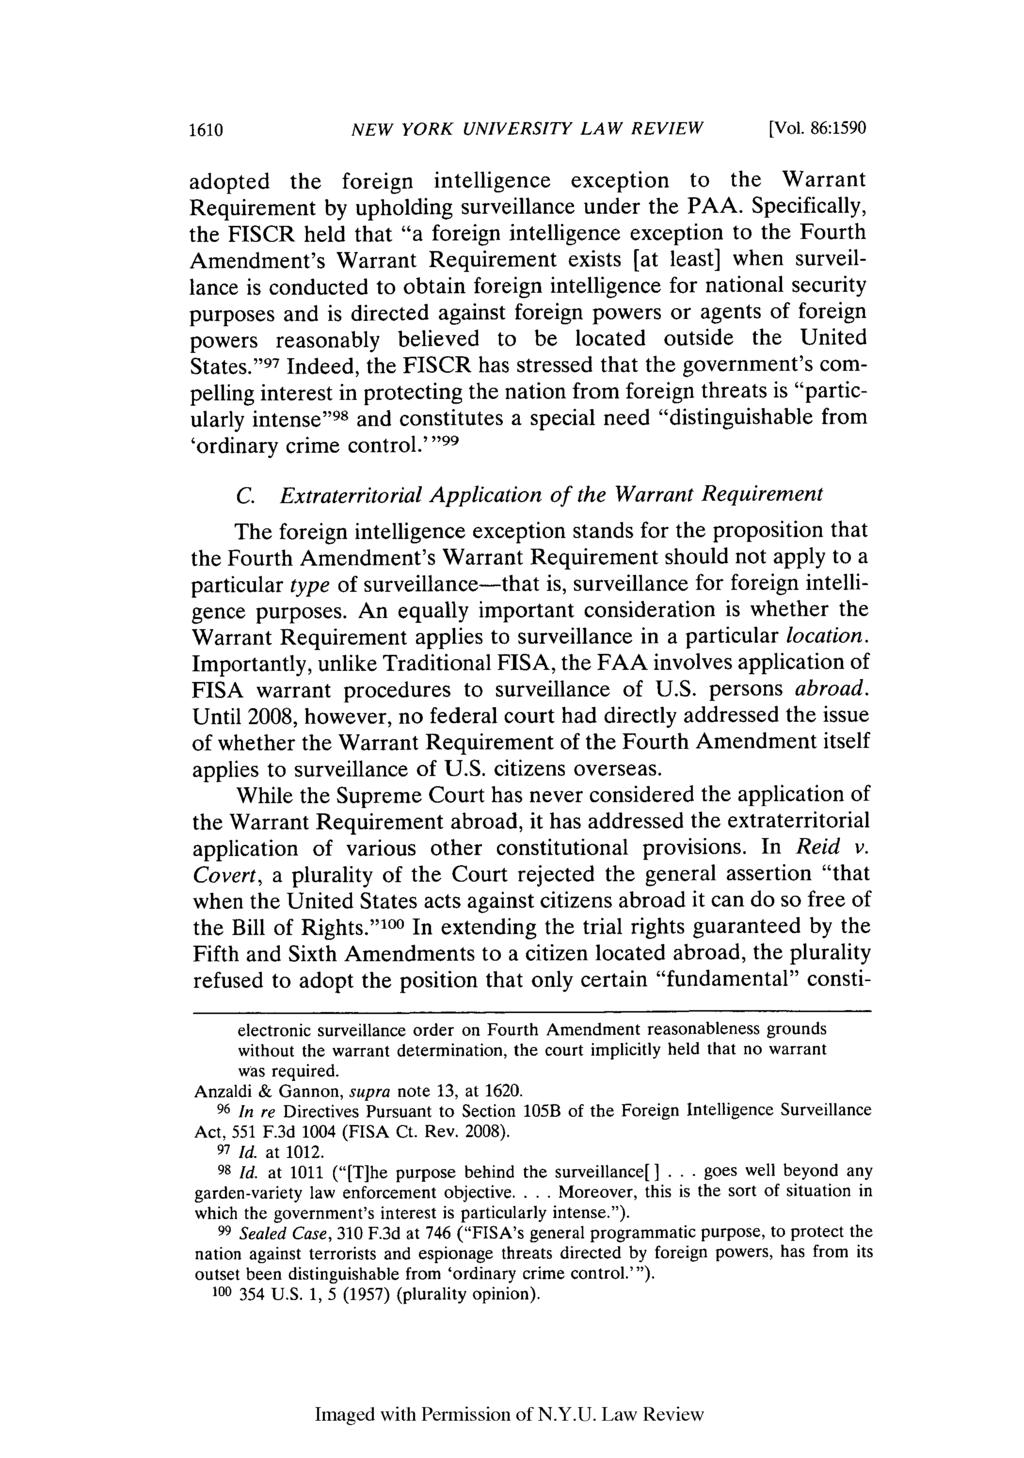 NEW YORK UNIVERSITY LAW REVIEW [Vol. 86:1590 adopted the foreign intelligence exception to the Warrant Requirement by upholding surveillance under the PAA.